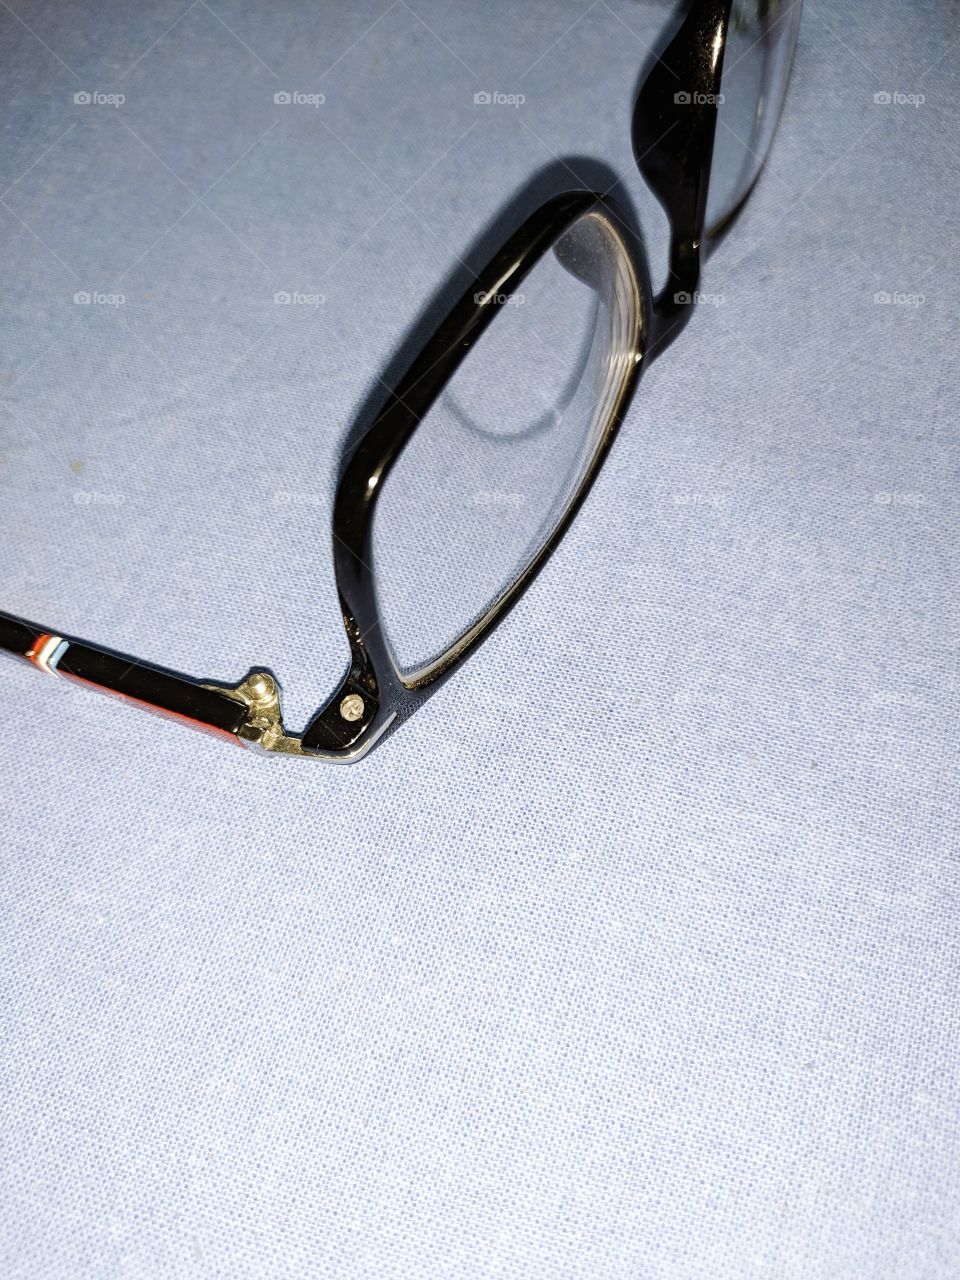 an old man spectacles on the closed table top